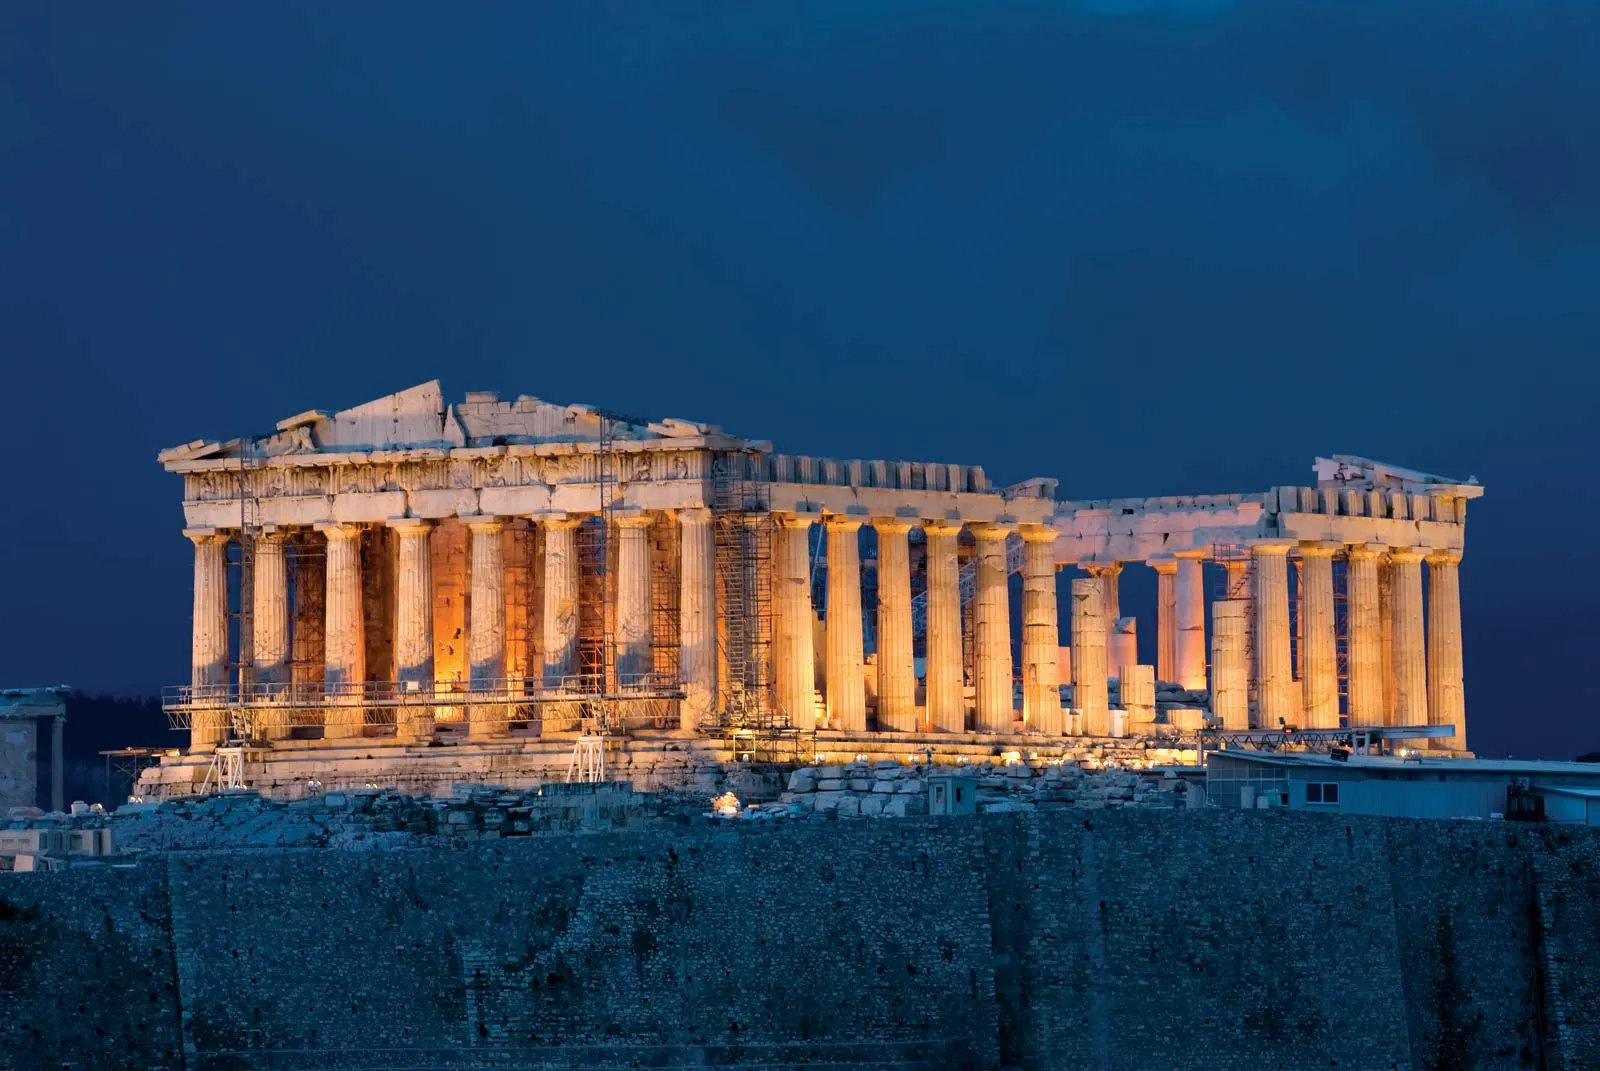 The Parthenon lit up at night, highlighting the Doric columns